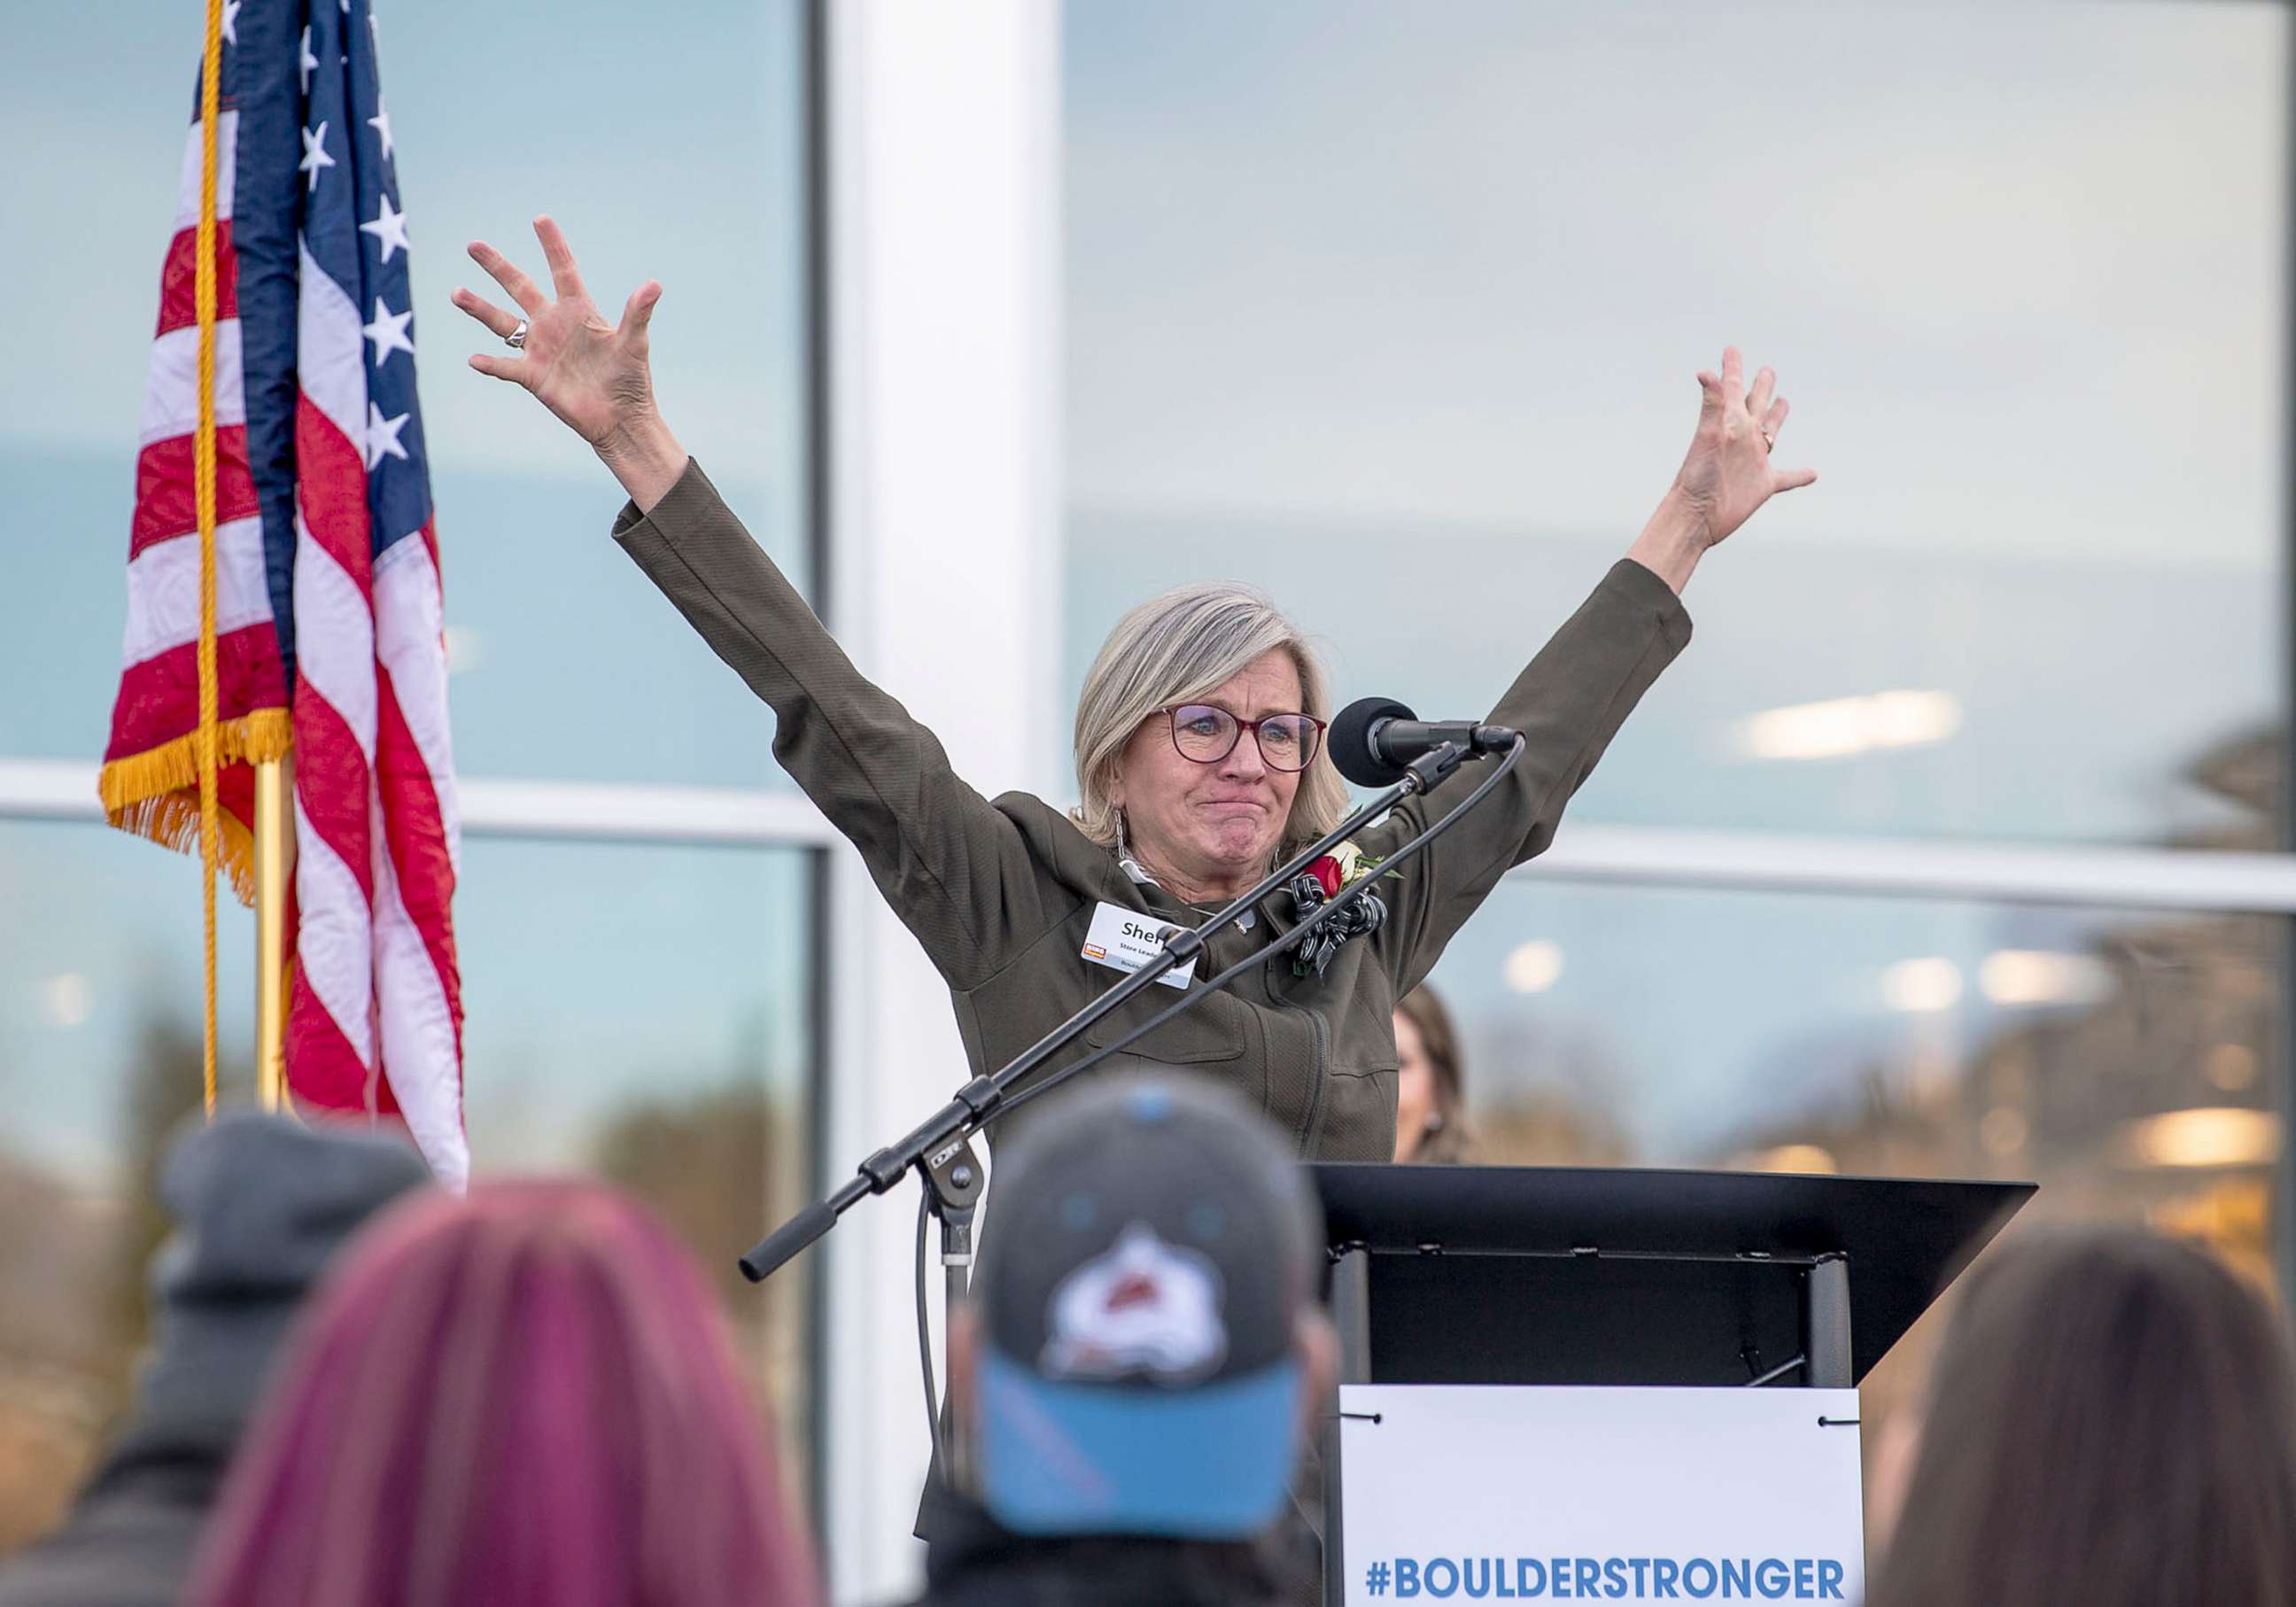 PHOTO: Store leader Sheri Bosman celebrates the reopening of a King Soopers grocery store, which was closed for nearly one year after a gunman killed 10 people there, in Boulder, Colo., Feb. 9, 2022. 